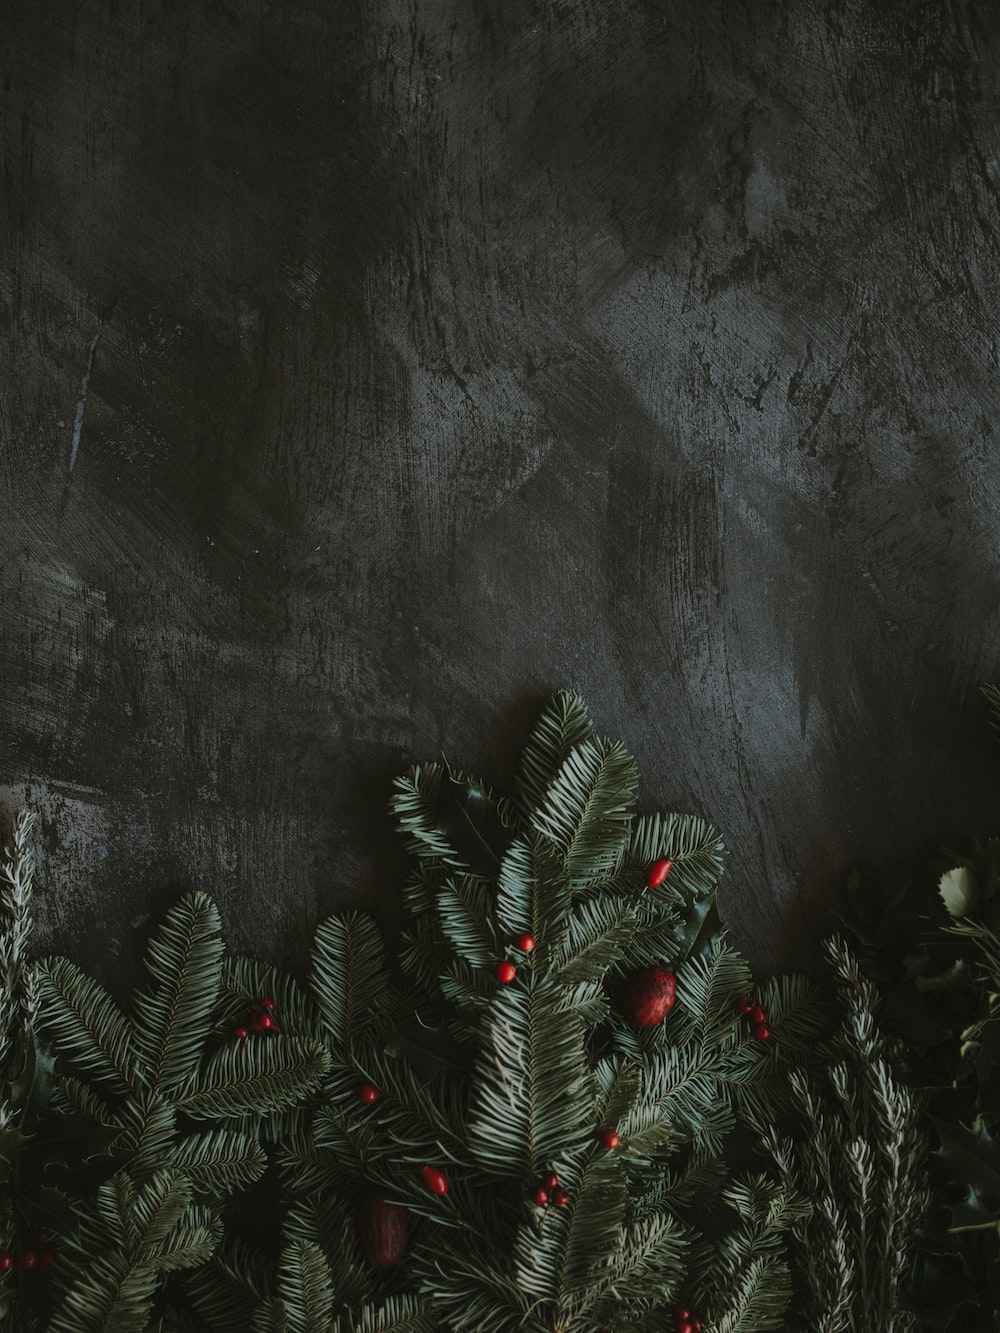 Dark Christmas Picture. Download Free Image